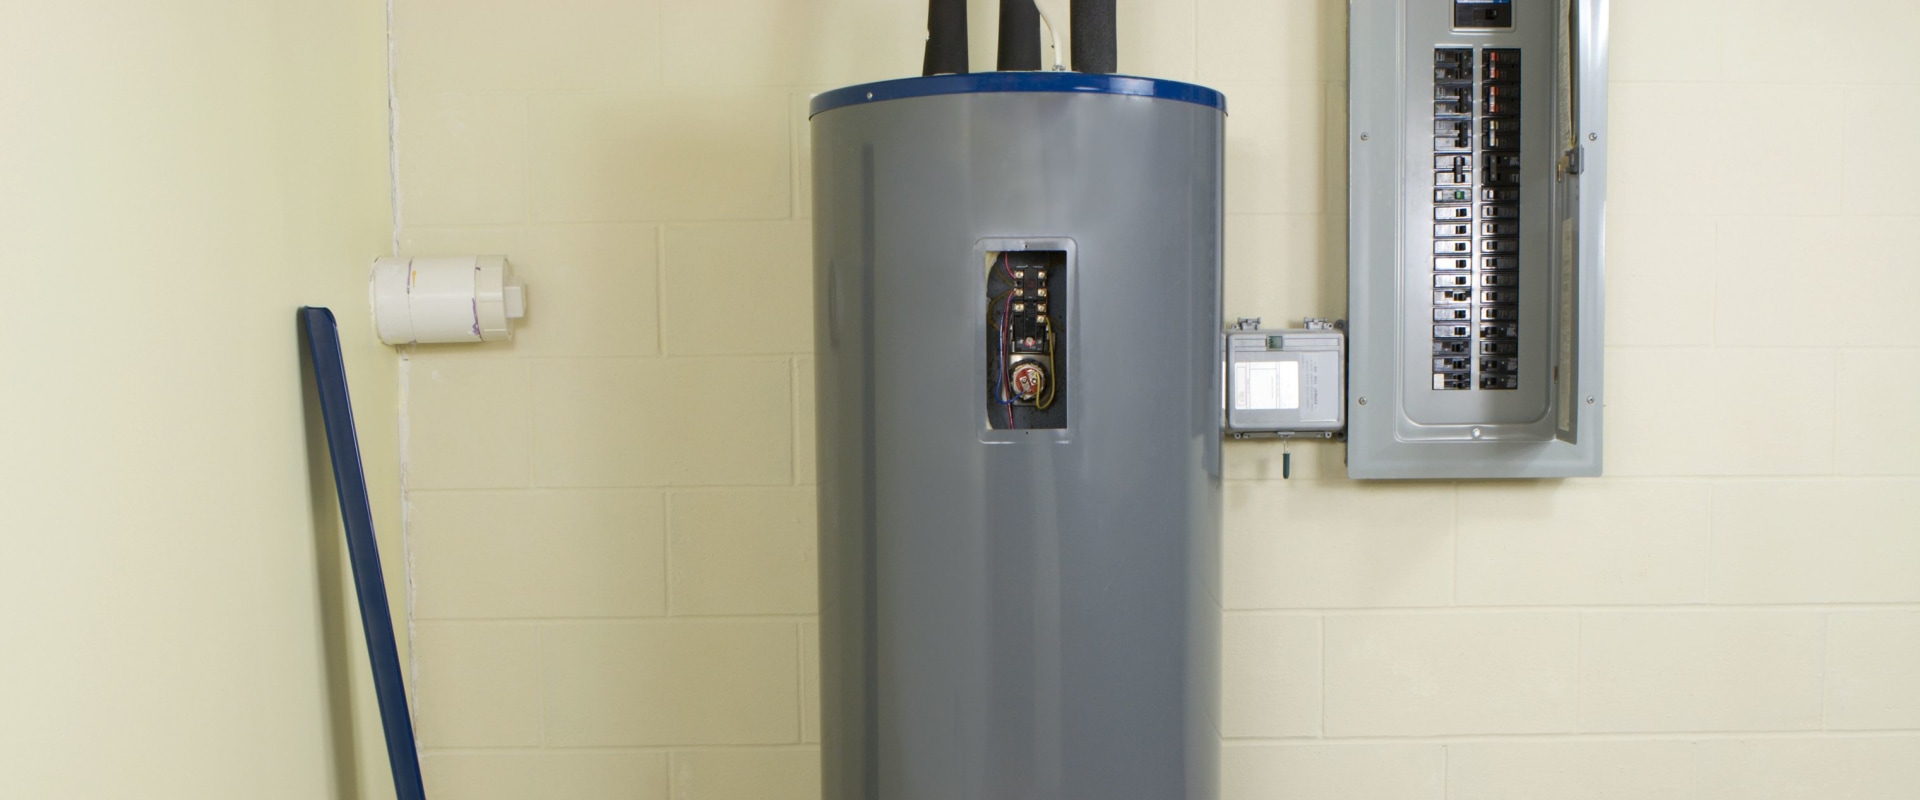 The Ultimate Guide to Choosing and Installing a Water Heater